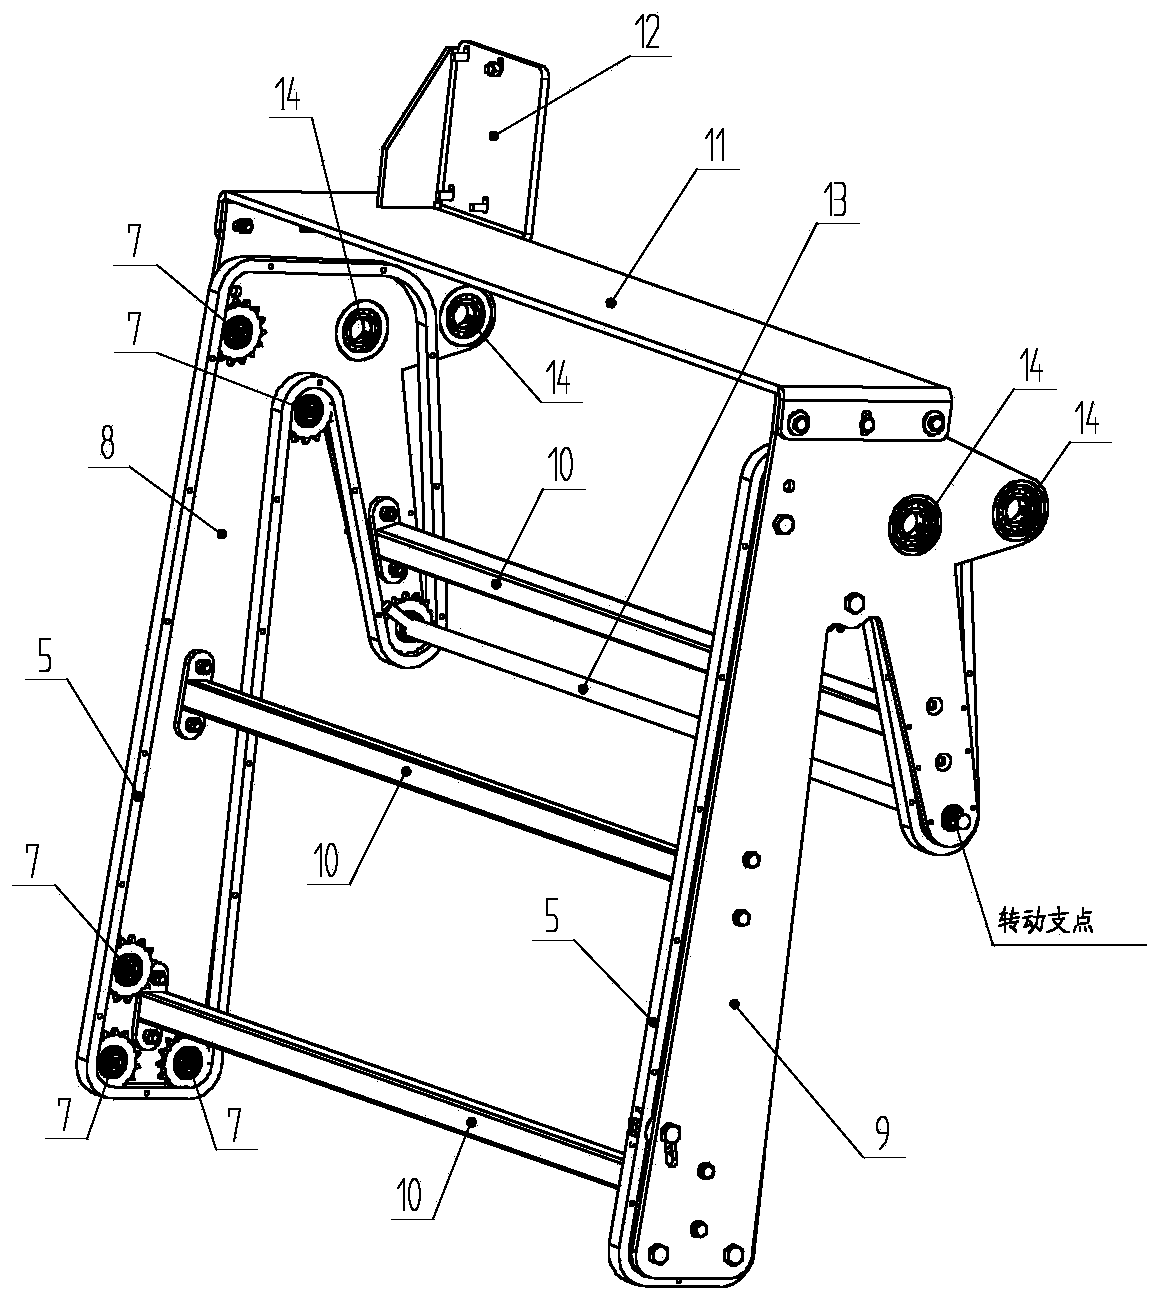 Mopping device and sanitation equipment